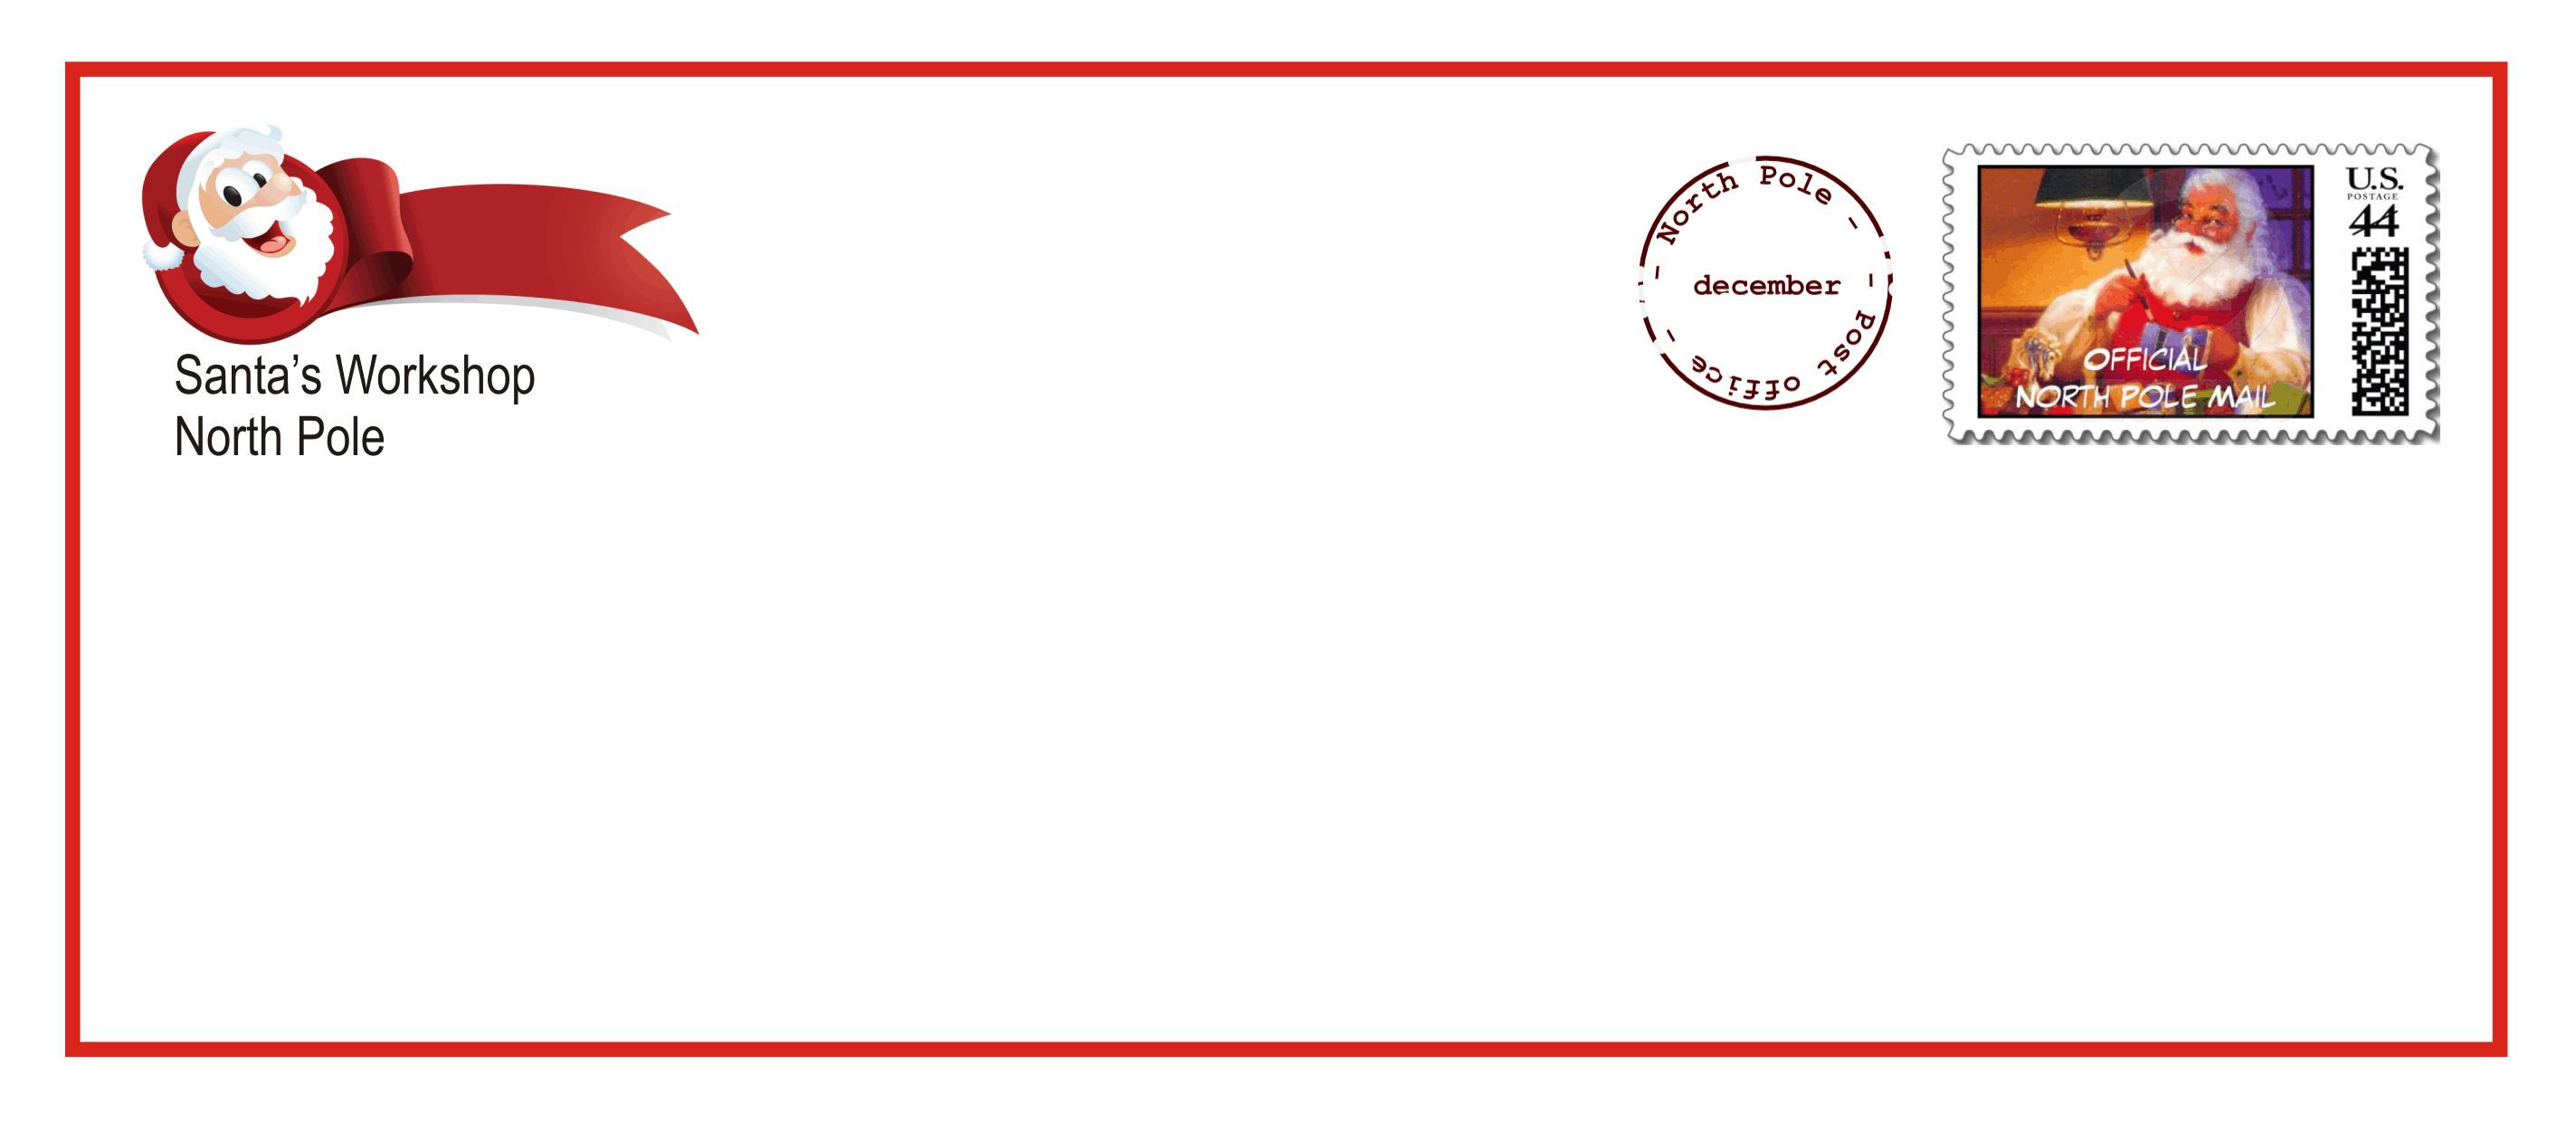 Printable Santa Letter Envelopes That Come With The Upgraded Letter